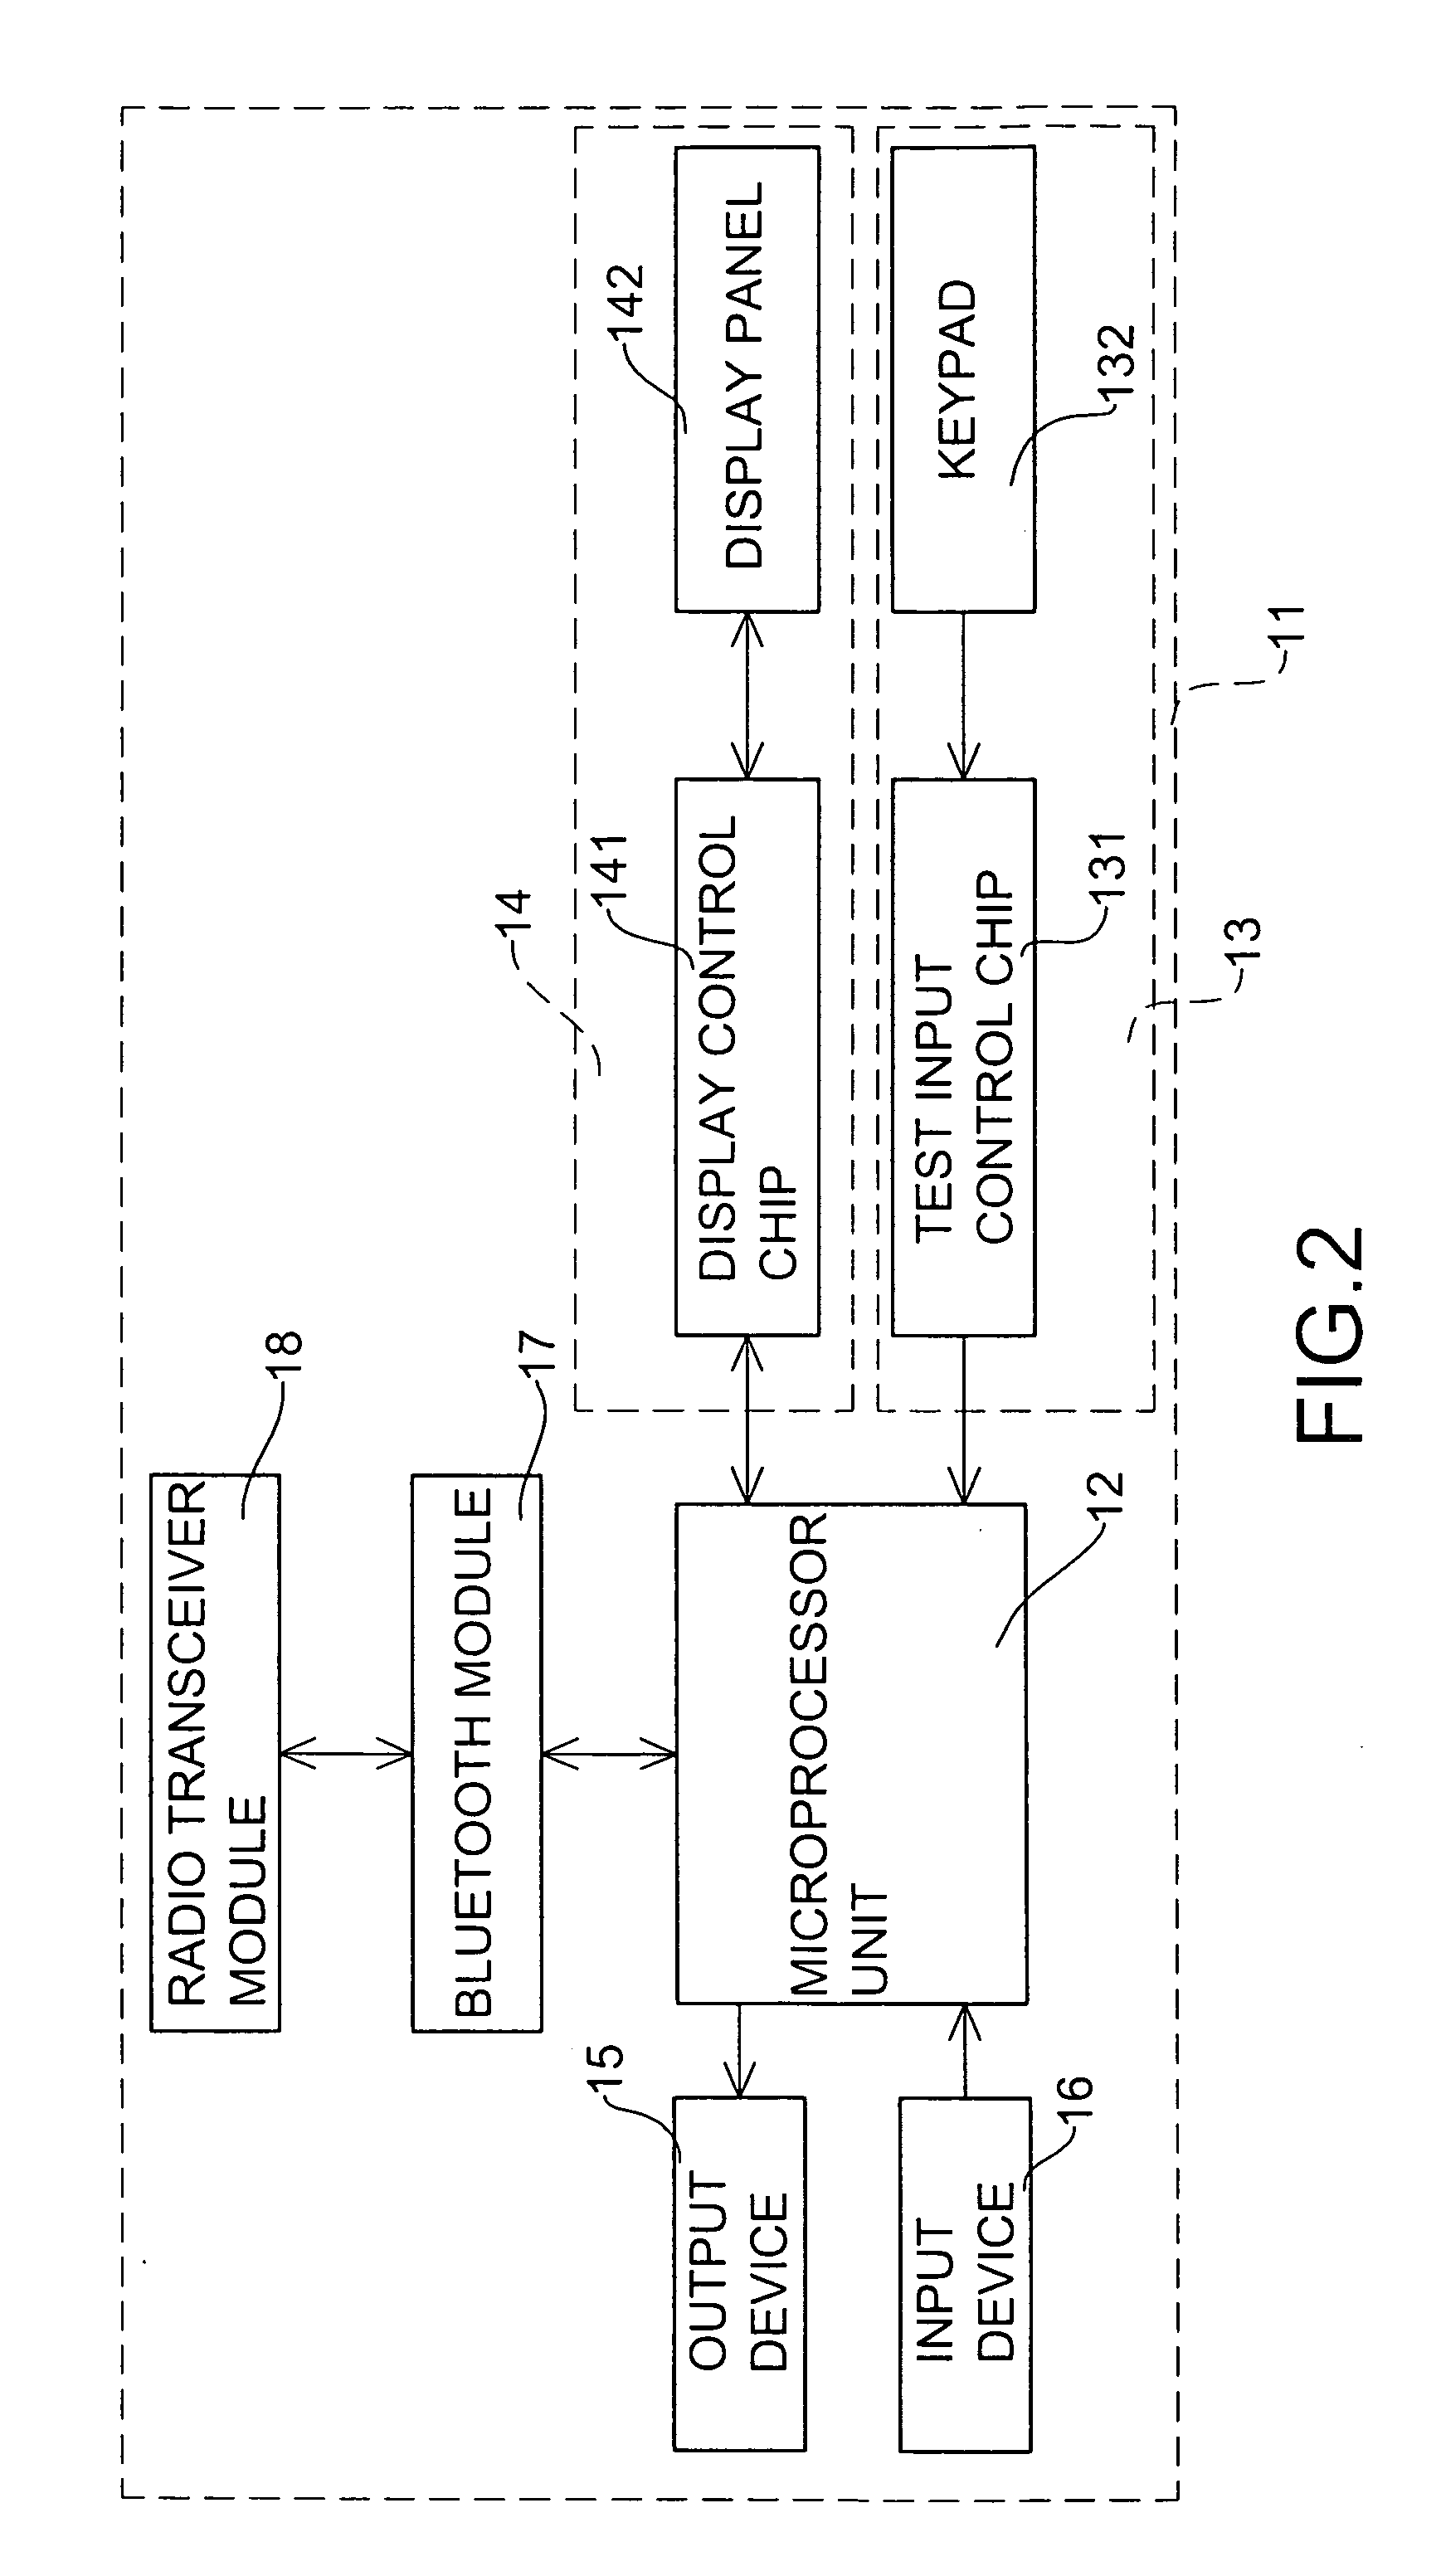 Communications integration apparatus to integrate different network structures